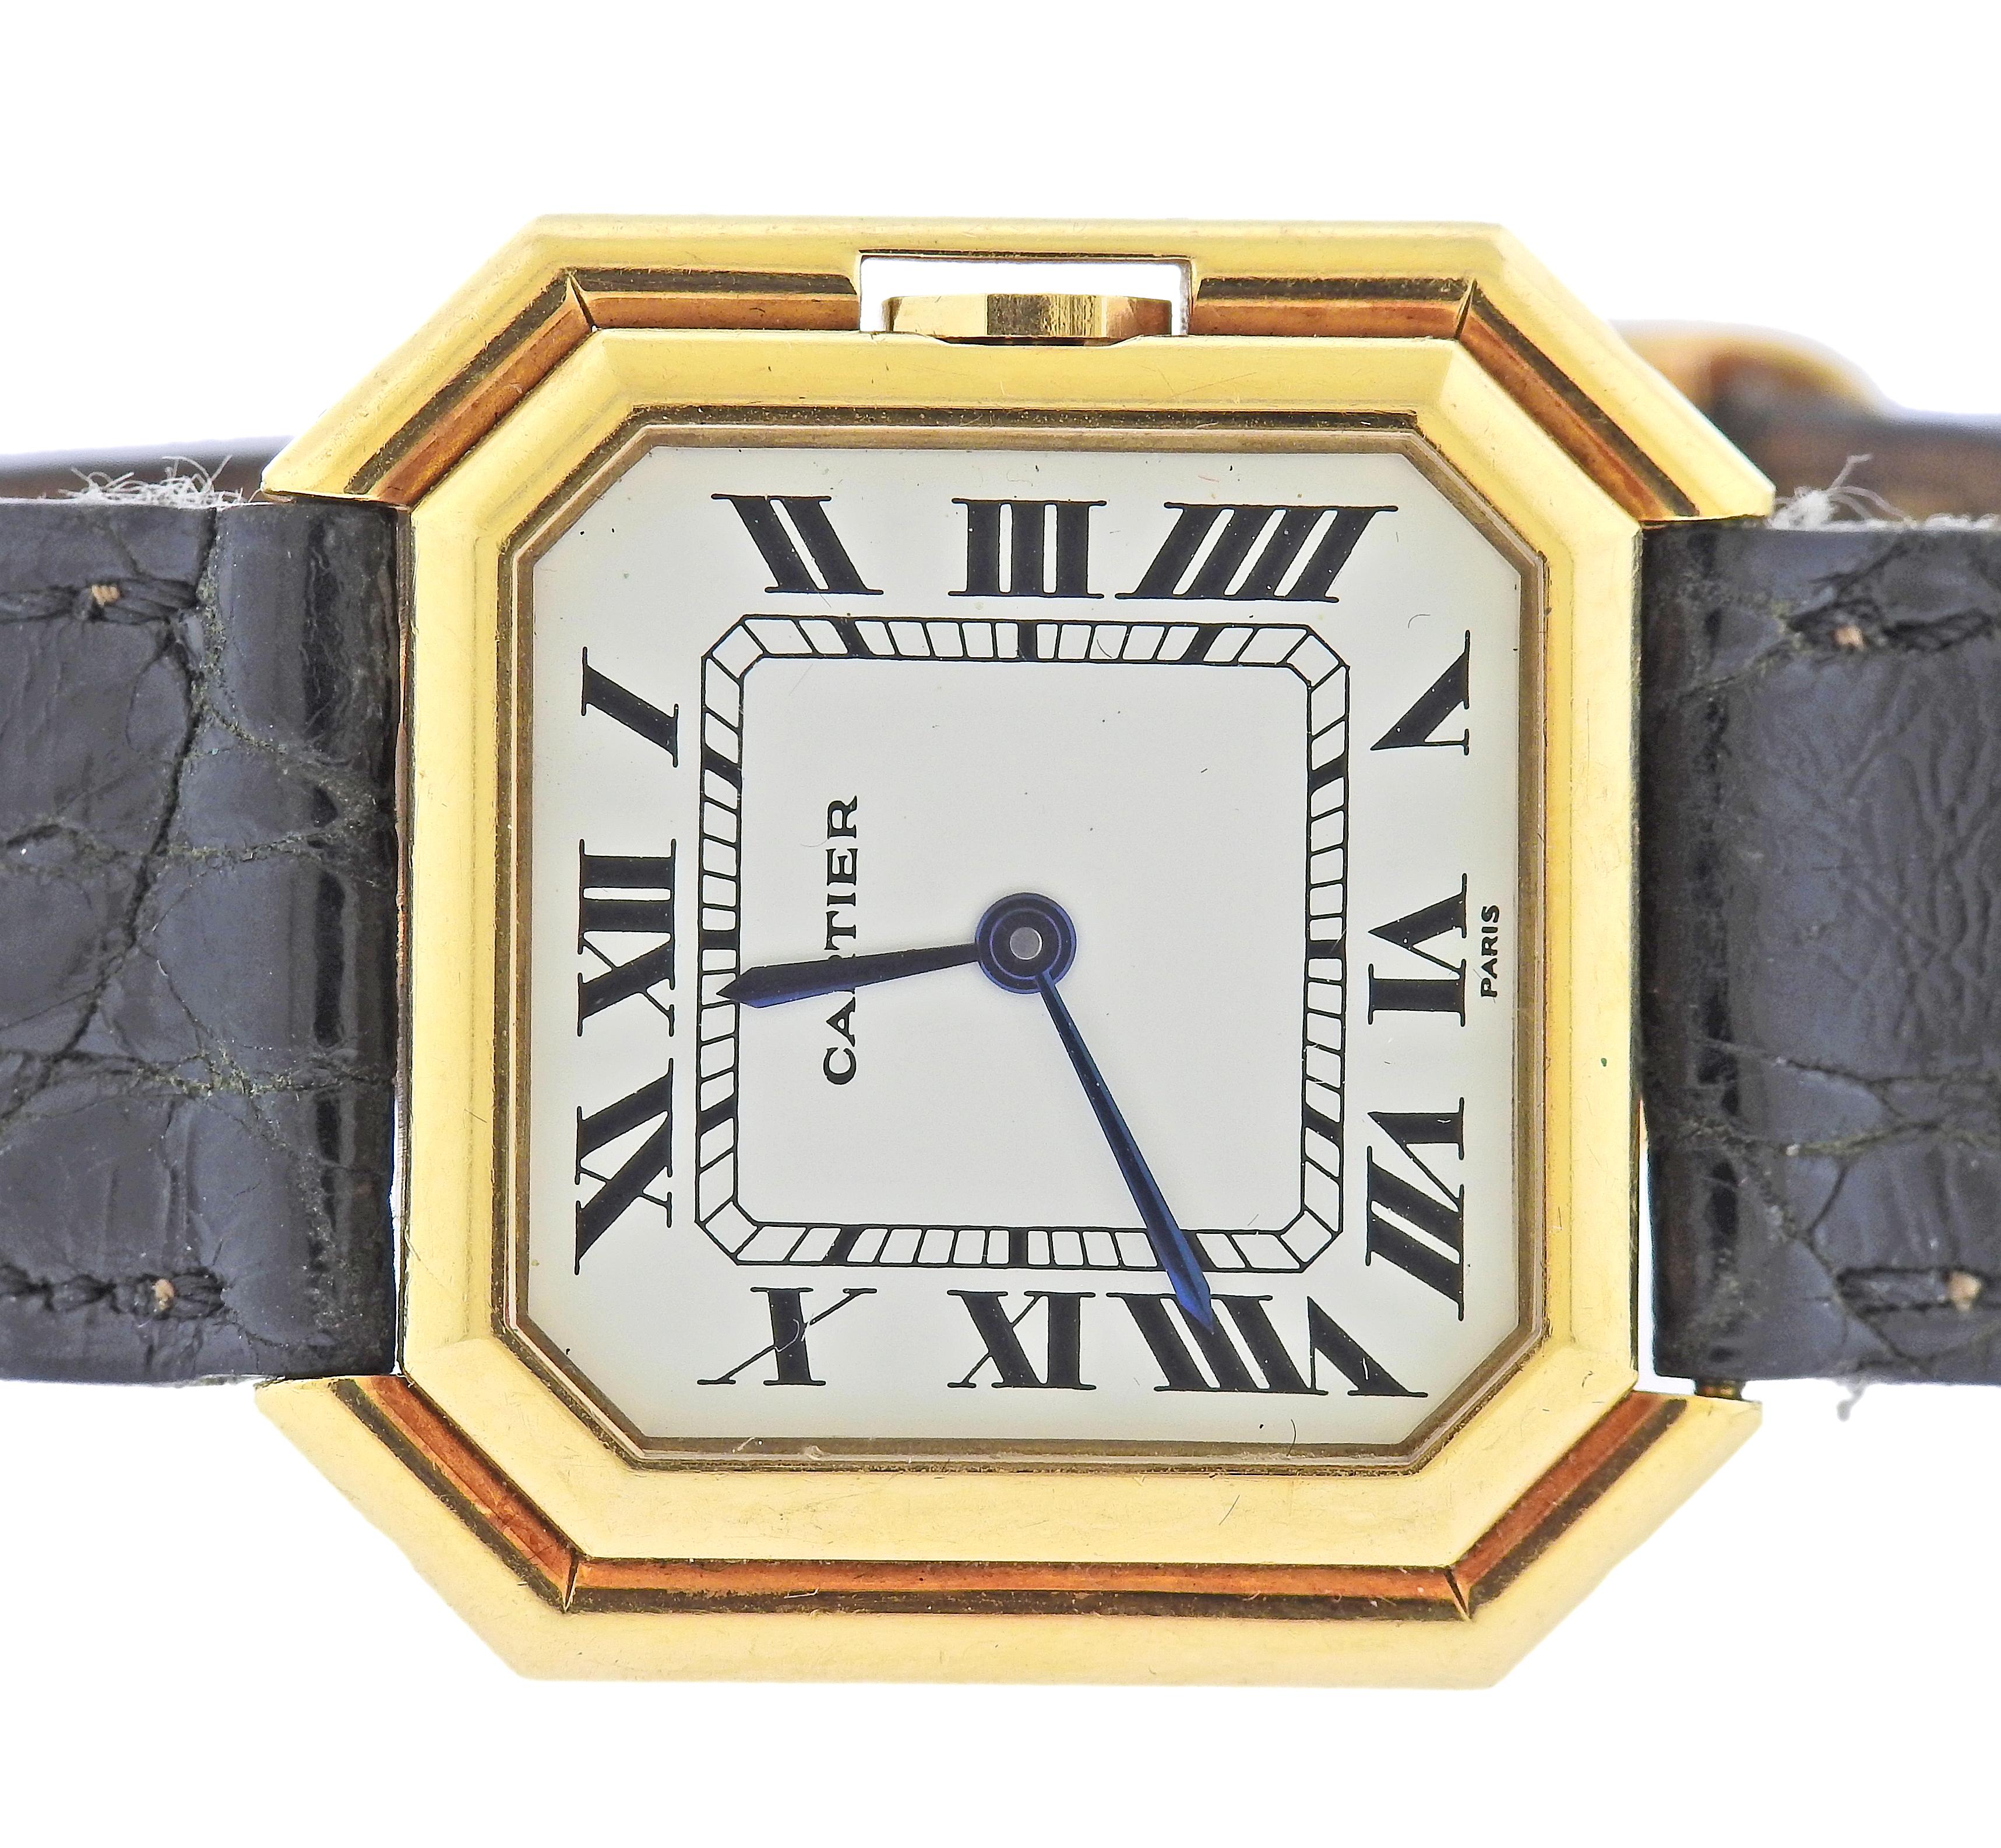 18k yellow gold Cartier Paris watch, with automatic movement.  Case measures 30mm x 30mm, with leather band and 18k gold Cartier deployant buckle. Marked on the case back - Cartier, Automatique, Paris, 170011466. Weight - 48.7 grams.